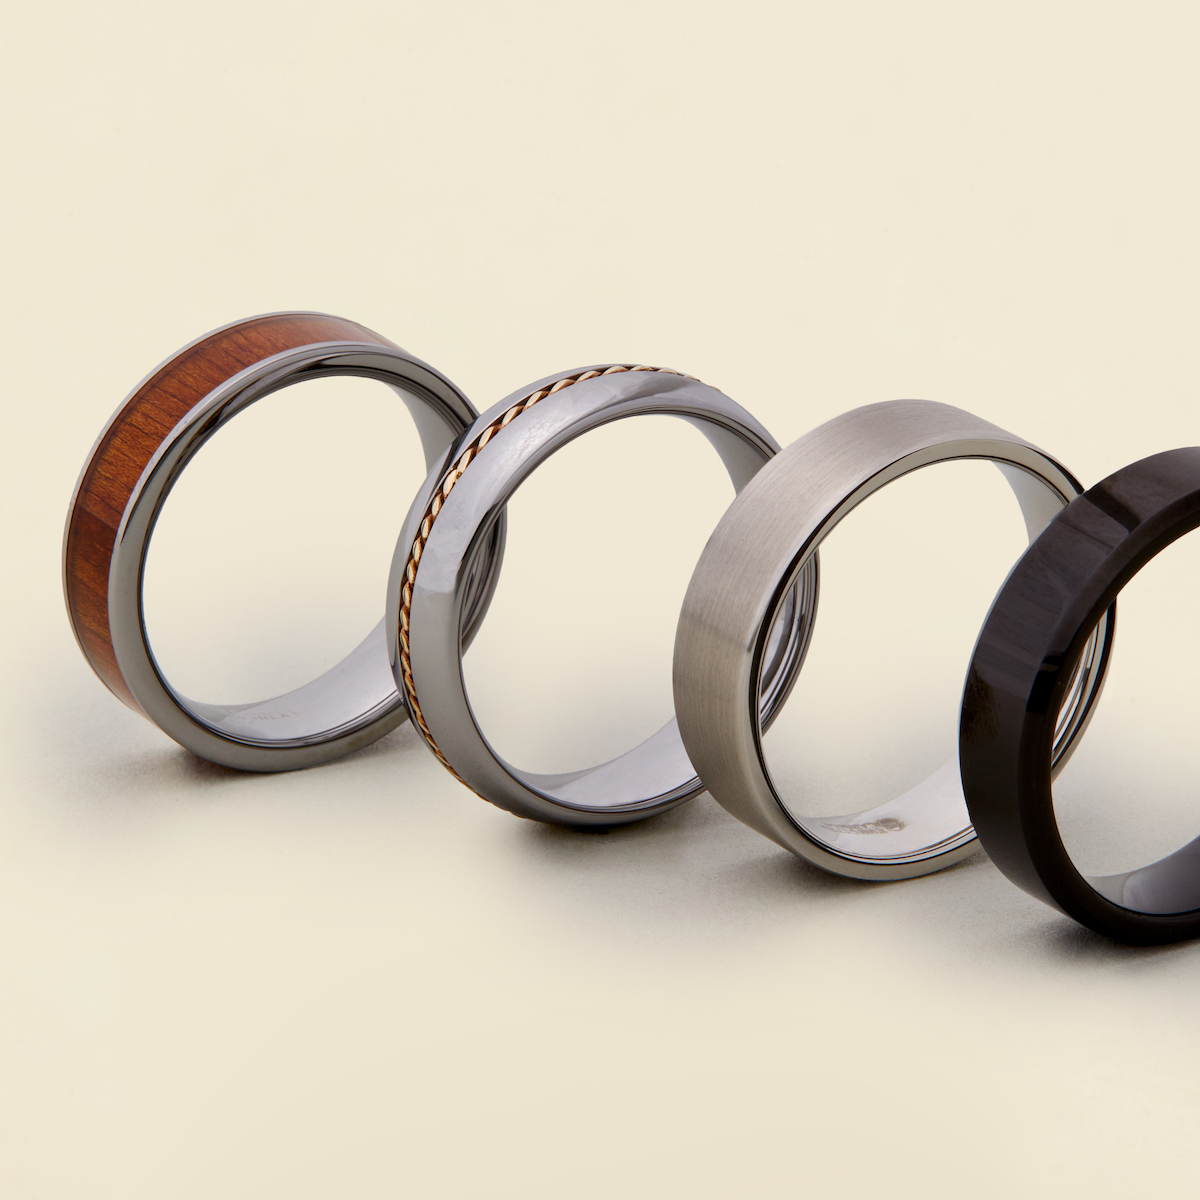 Four different styles of grooms wedding rings